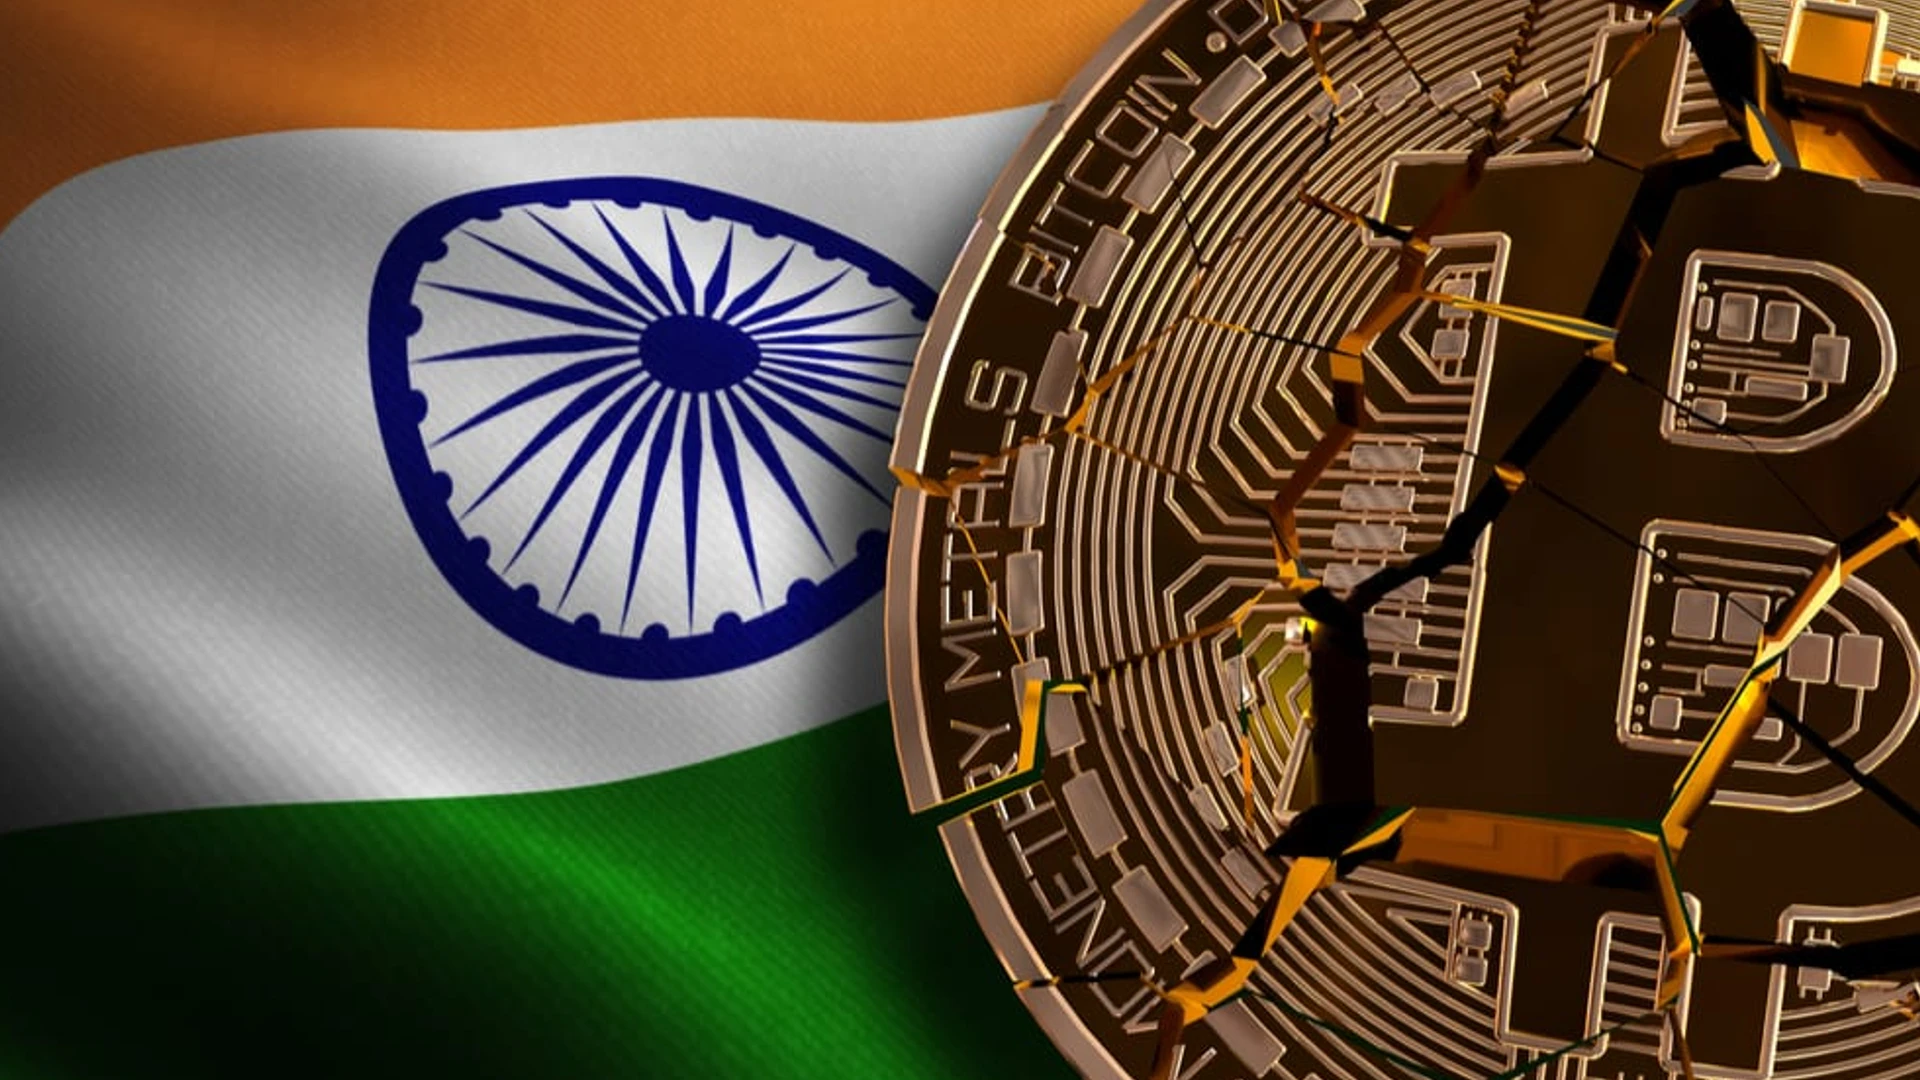 Cryptocurrency In India: With A Proposed Ban, What Is The Future?